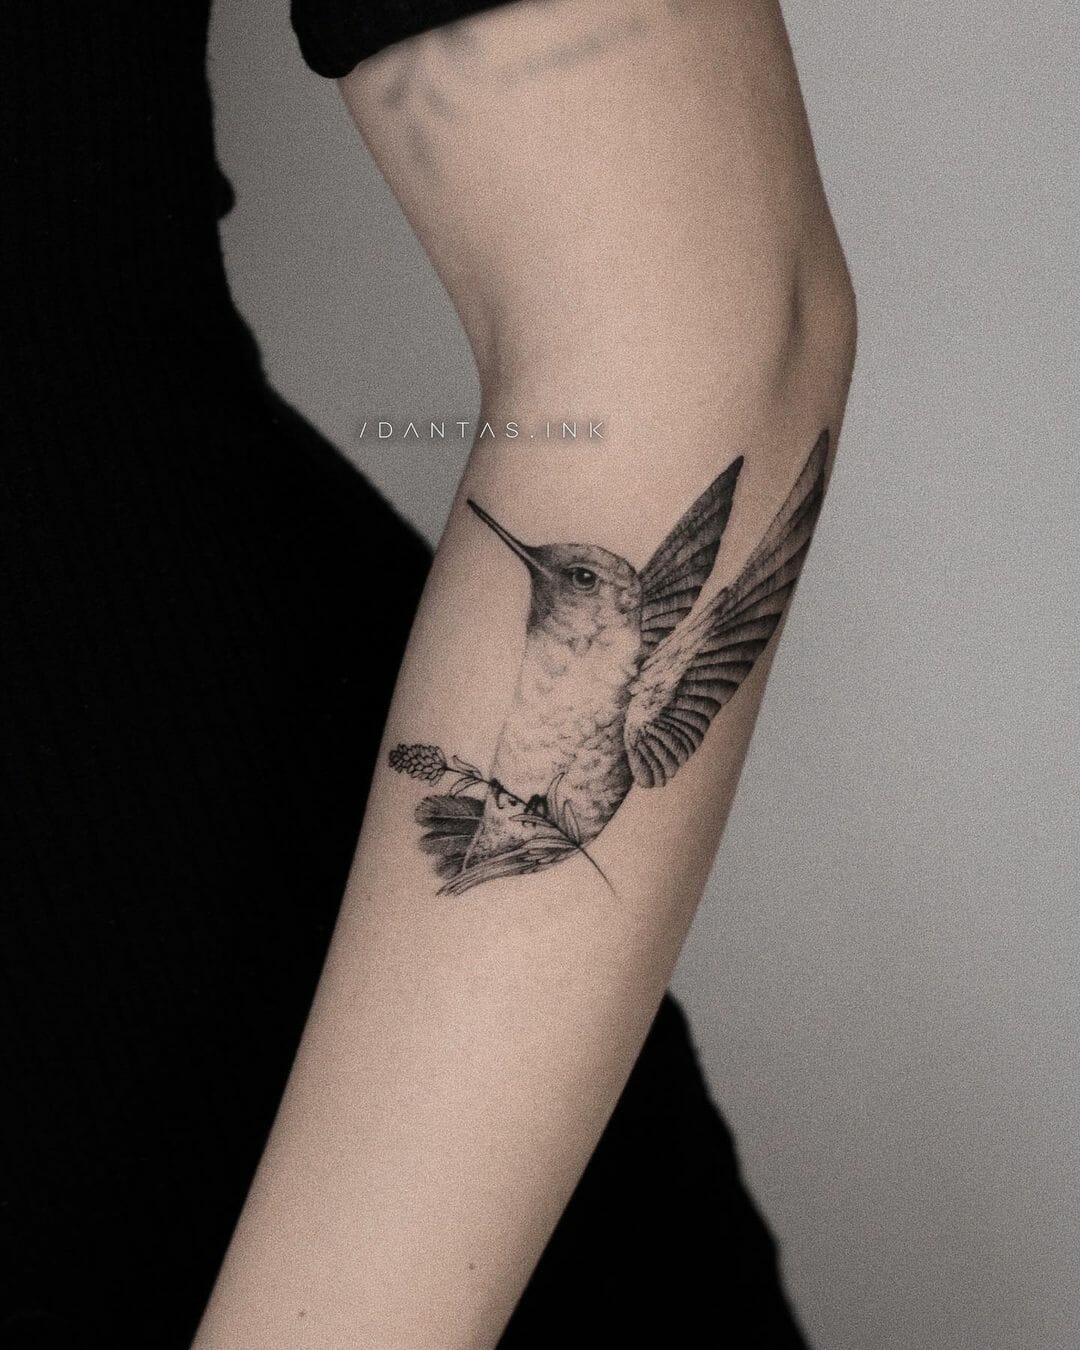 101 Best Hummingbird Tattoo Ideas You Have To See To Believe!